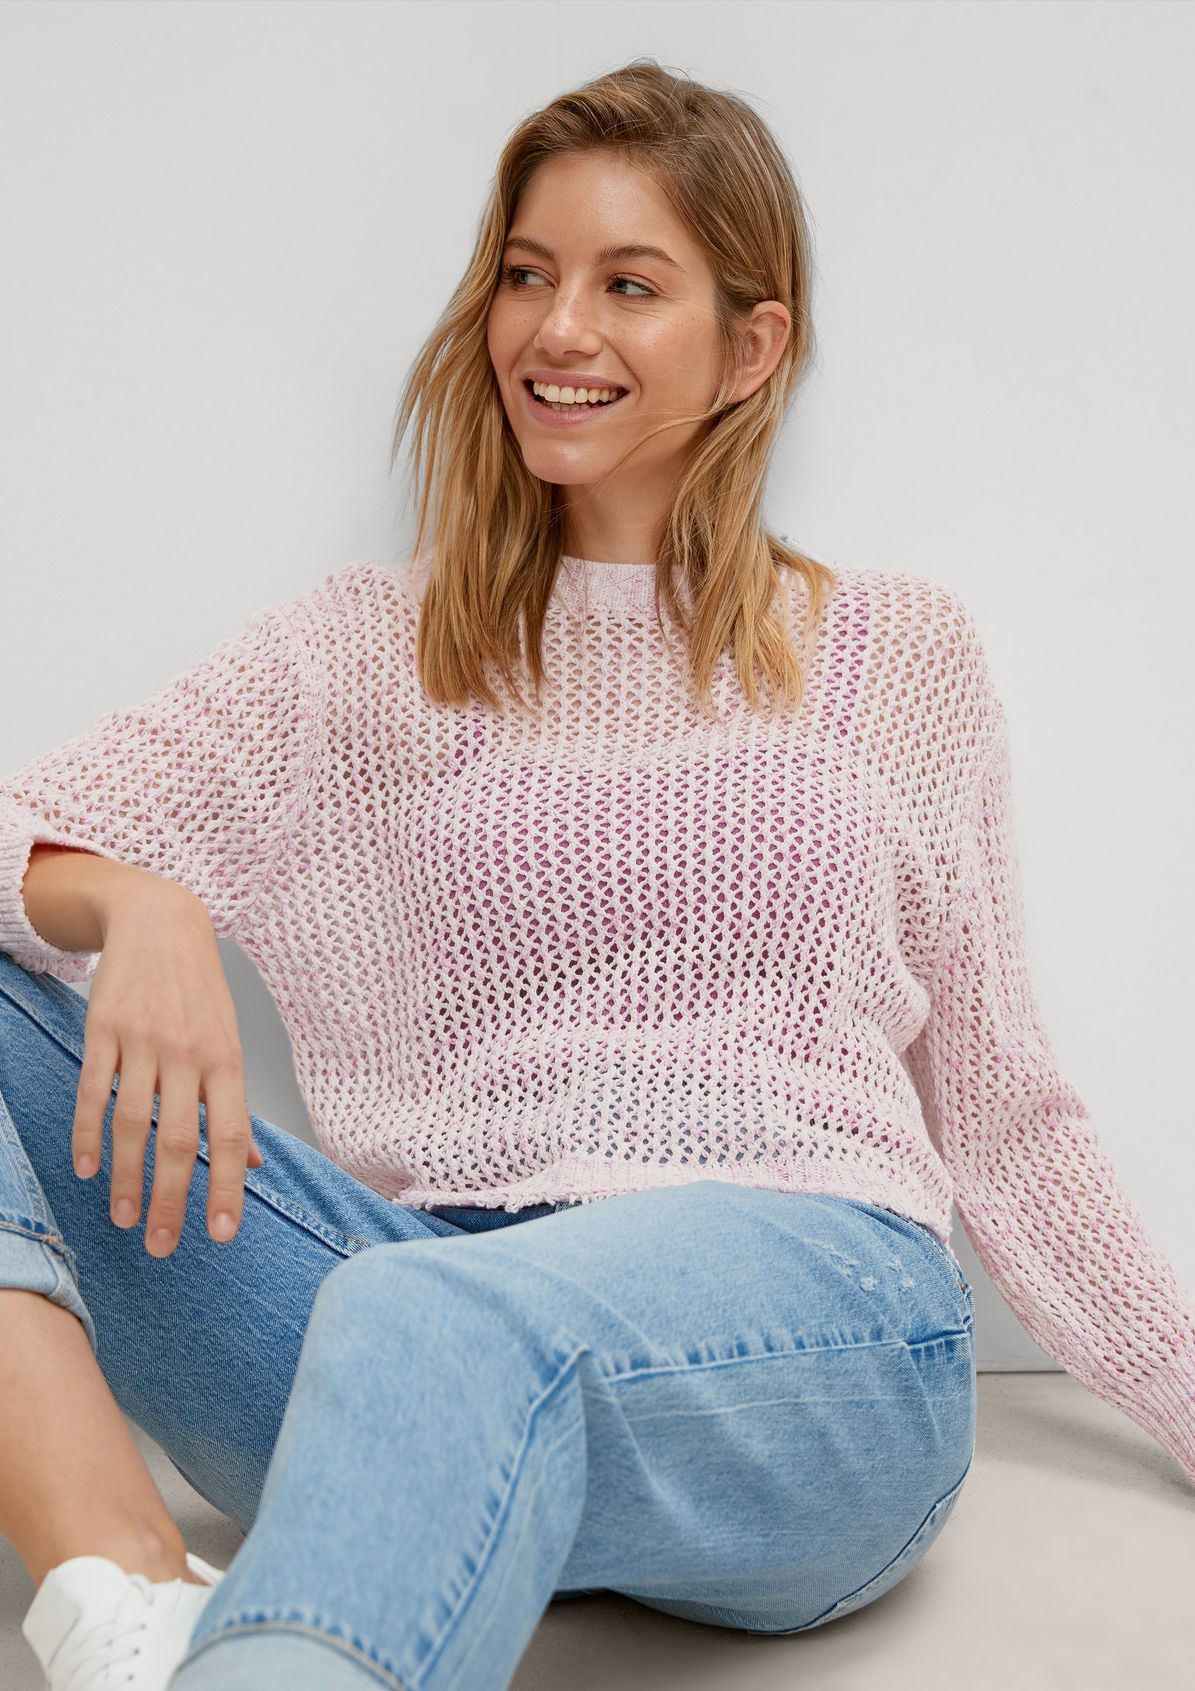 Openwork knit jumper from comma